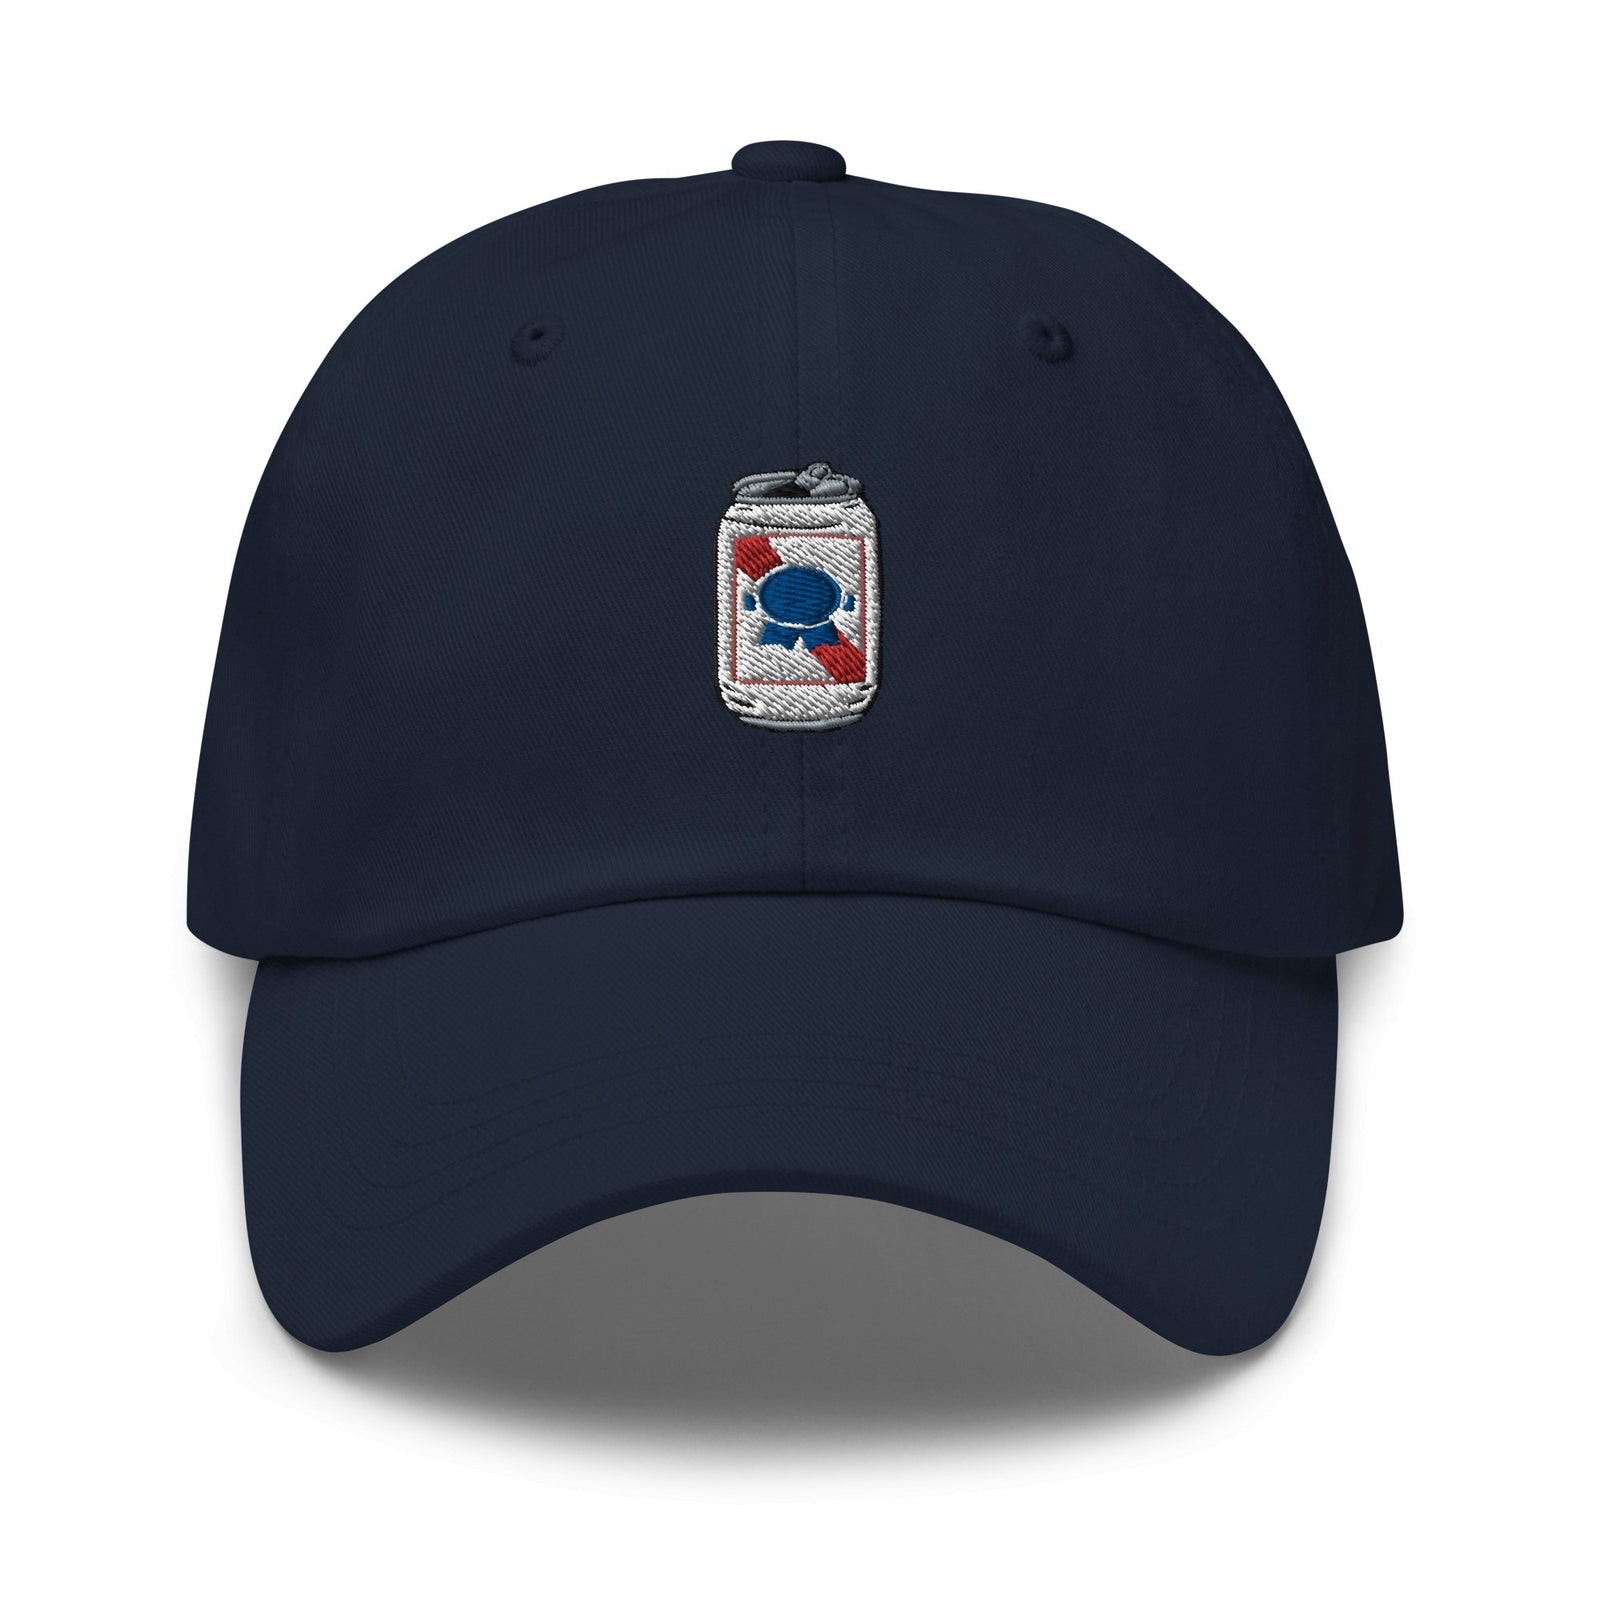 //cdn.shopify.com/s/files/1/0274/2488/2766/products/beer-can-dad-hat-502369_5000x.jpg?v=1652422043 5000w,
    //cdn.shopify.com/s/files/1/0274/2488/2766/products/beer-can-dad-hat-502369_4500x.jpg?v=1652422043 4500w,
    //cdn.shopify.com/s/files/1/0274/2488/2766/products/beer-can-dad-hat-502369_4000x.jpg?v=1652422043 4000w,
    //cdn.shopify.com/s/files/1/0274/2488/2766/products/beer-can-dad-hat-502369_3500x.jpg?v=1652422043 3500w,
    //cdn.shopify.com/s/files/1/0274/2488/2766/products/beer-can-dad-hat-502369_3000x.jpg?v=1652422043 3000w,
    //cdn.shopify.com/s/files/1/0274/2488/2766/products/beer-can-dad-hat-502369_2500x.jpg?v=1652422043 2500w,
    //cdn.shopify.com/s/files/1/0274/2488/2766/products/beer-can-dad-hat-502369_2000x.jpg?v=1652422043 2000w,
    //cdn.shopify.com/s/files/1/0274/2488/2766/products/beer-can-dad-hat-502369_1800x.jpg?v=1652422043 1800w,
    //cdn.shopify.com/s/files/1/0274/2488/2766/products/beer-can-dad-hat-502369_1600x.jpg?v=1652422043 1600w,
    //cdn.shopify.com/s/files/1/0274/2488/2766/products/beer-can-dad-hat-502369_1400x.jpg?v=1652422043 1400w,
    //cdn.shopify.com/s/files/1/0274/2488/2766/products/beer-can-dad-hat-502369_1200x.jpg?v=1652422043 1200w,
    //cdn.shopify.com/s/files/1/0274/2488/2766/products/beer-can-dad-hat-502369_1000x.jpg?v=1652422043 1000w,
    //cdn.shopify.com/s/files/1/0274/2488/2766/products/beer-can-dad-hat-502369_800x.jpg?v=1652422043 800w,
    //cdn.shopify.com/s/files/1/0274/2488/2766/products/beer-can-dad-hat-502369_600x.jpg?v=1652422043 600w,
    //cdn.shopify.com/s/files/1/0274/2488/2766/products/beer-can-dad-hat-502369_400x.jpg?v=1652422043 400w,
    //cdn.shopify.com/s/files/1/0274/2488/2766/products/beer-can-dad-hat-502369_200x.jpg?v=1652422043 200w